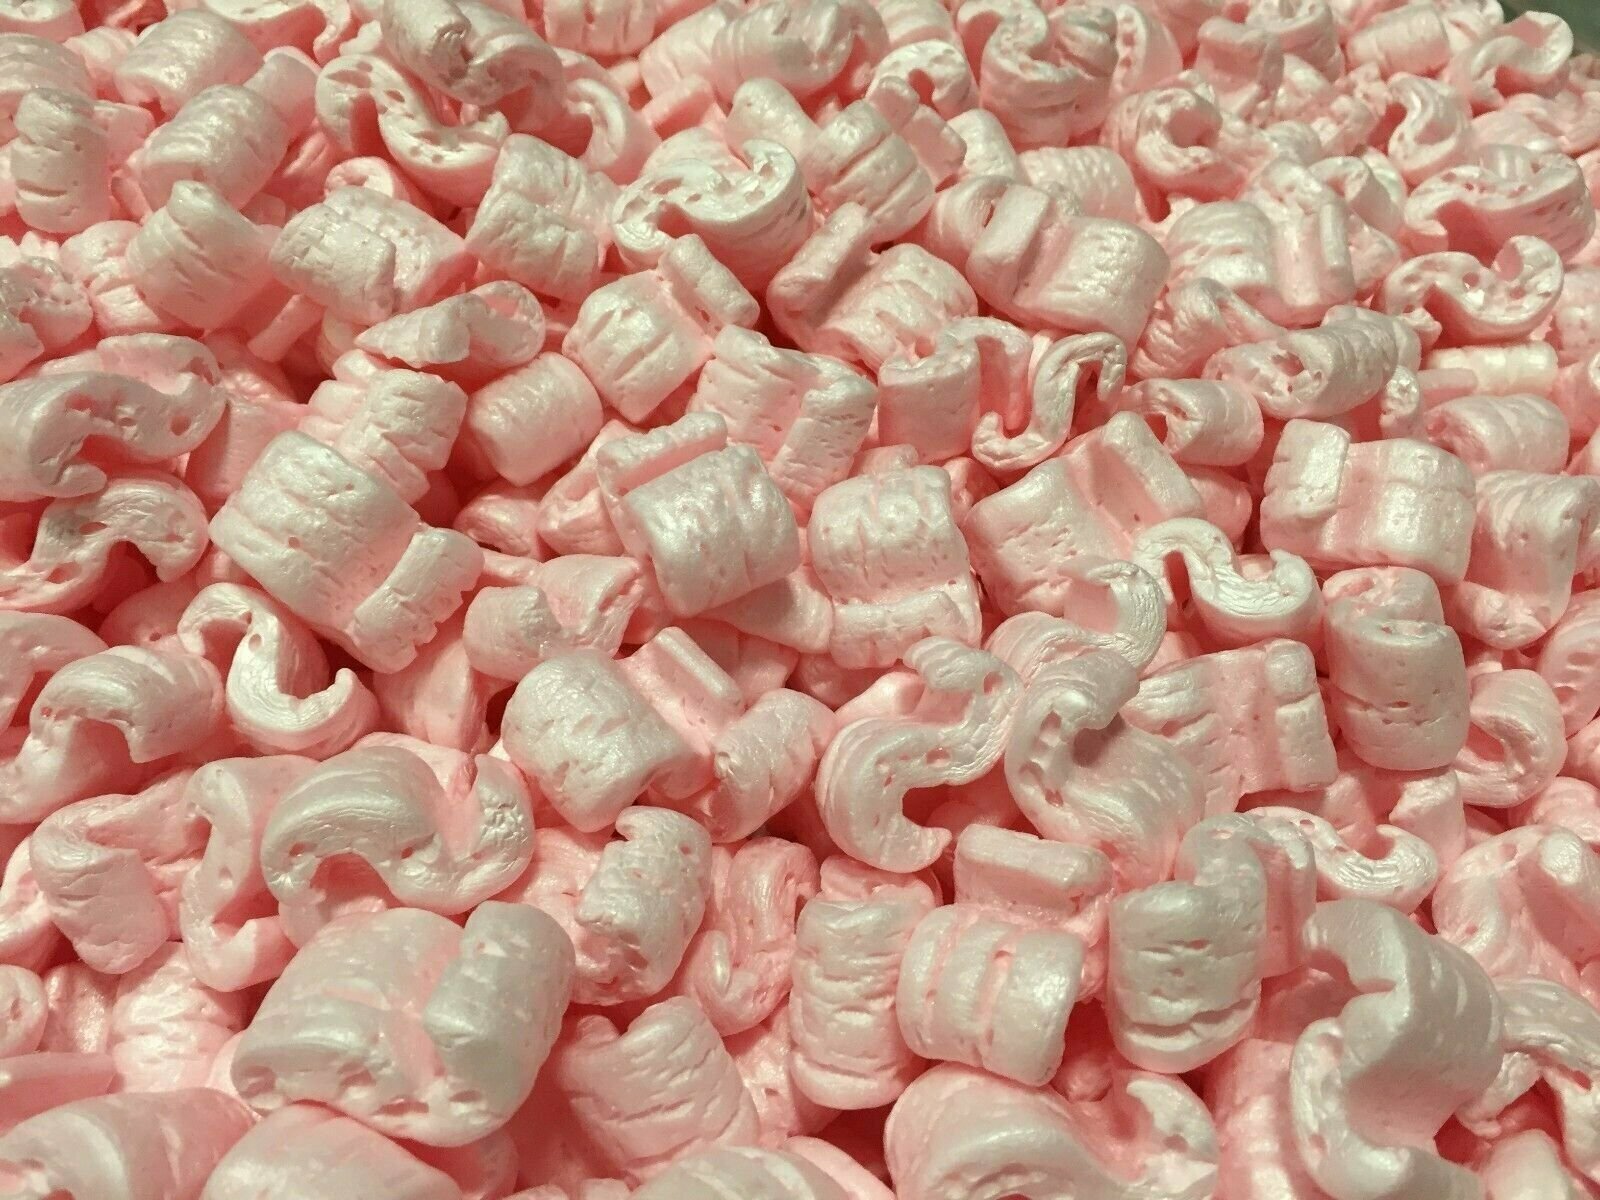 Packing Peanuts Shipping Anti Static Loose Fill 60 Gallons 8 Cubic Feet Pink